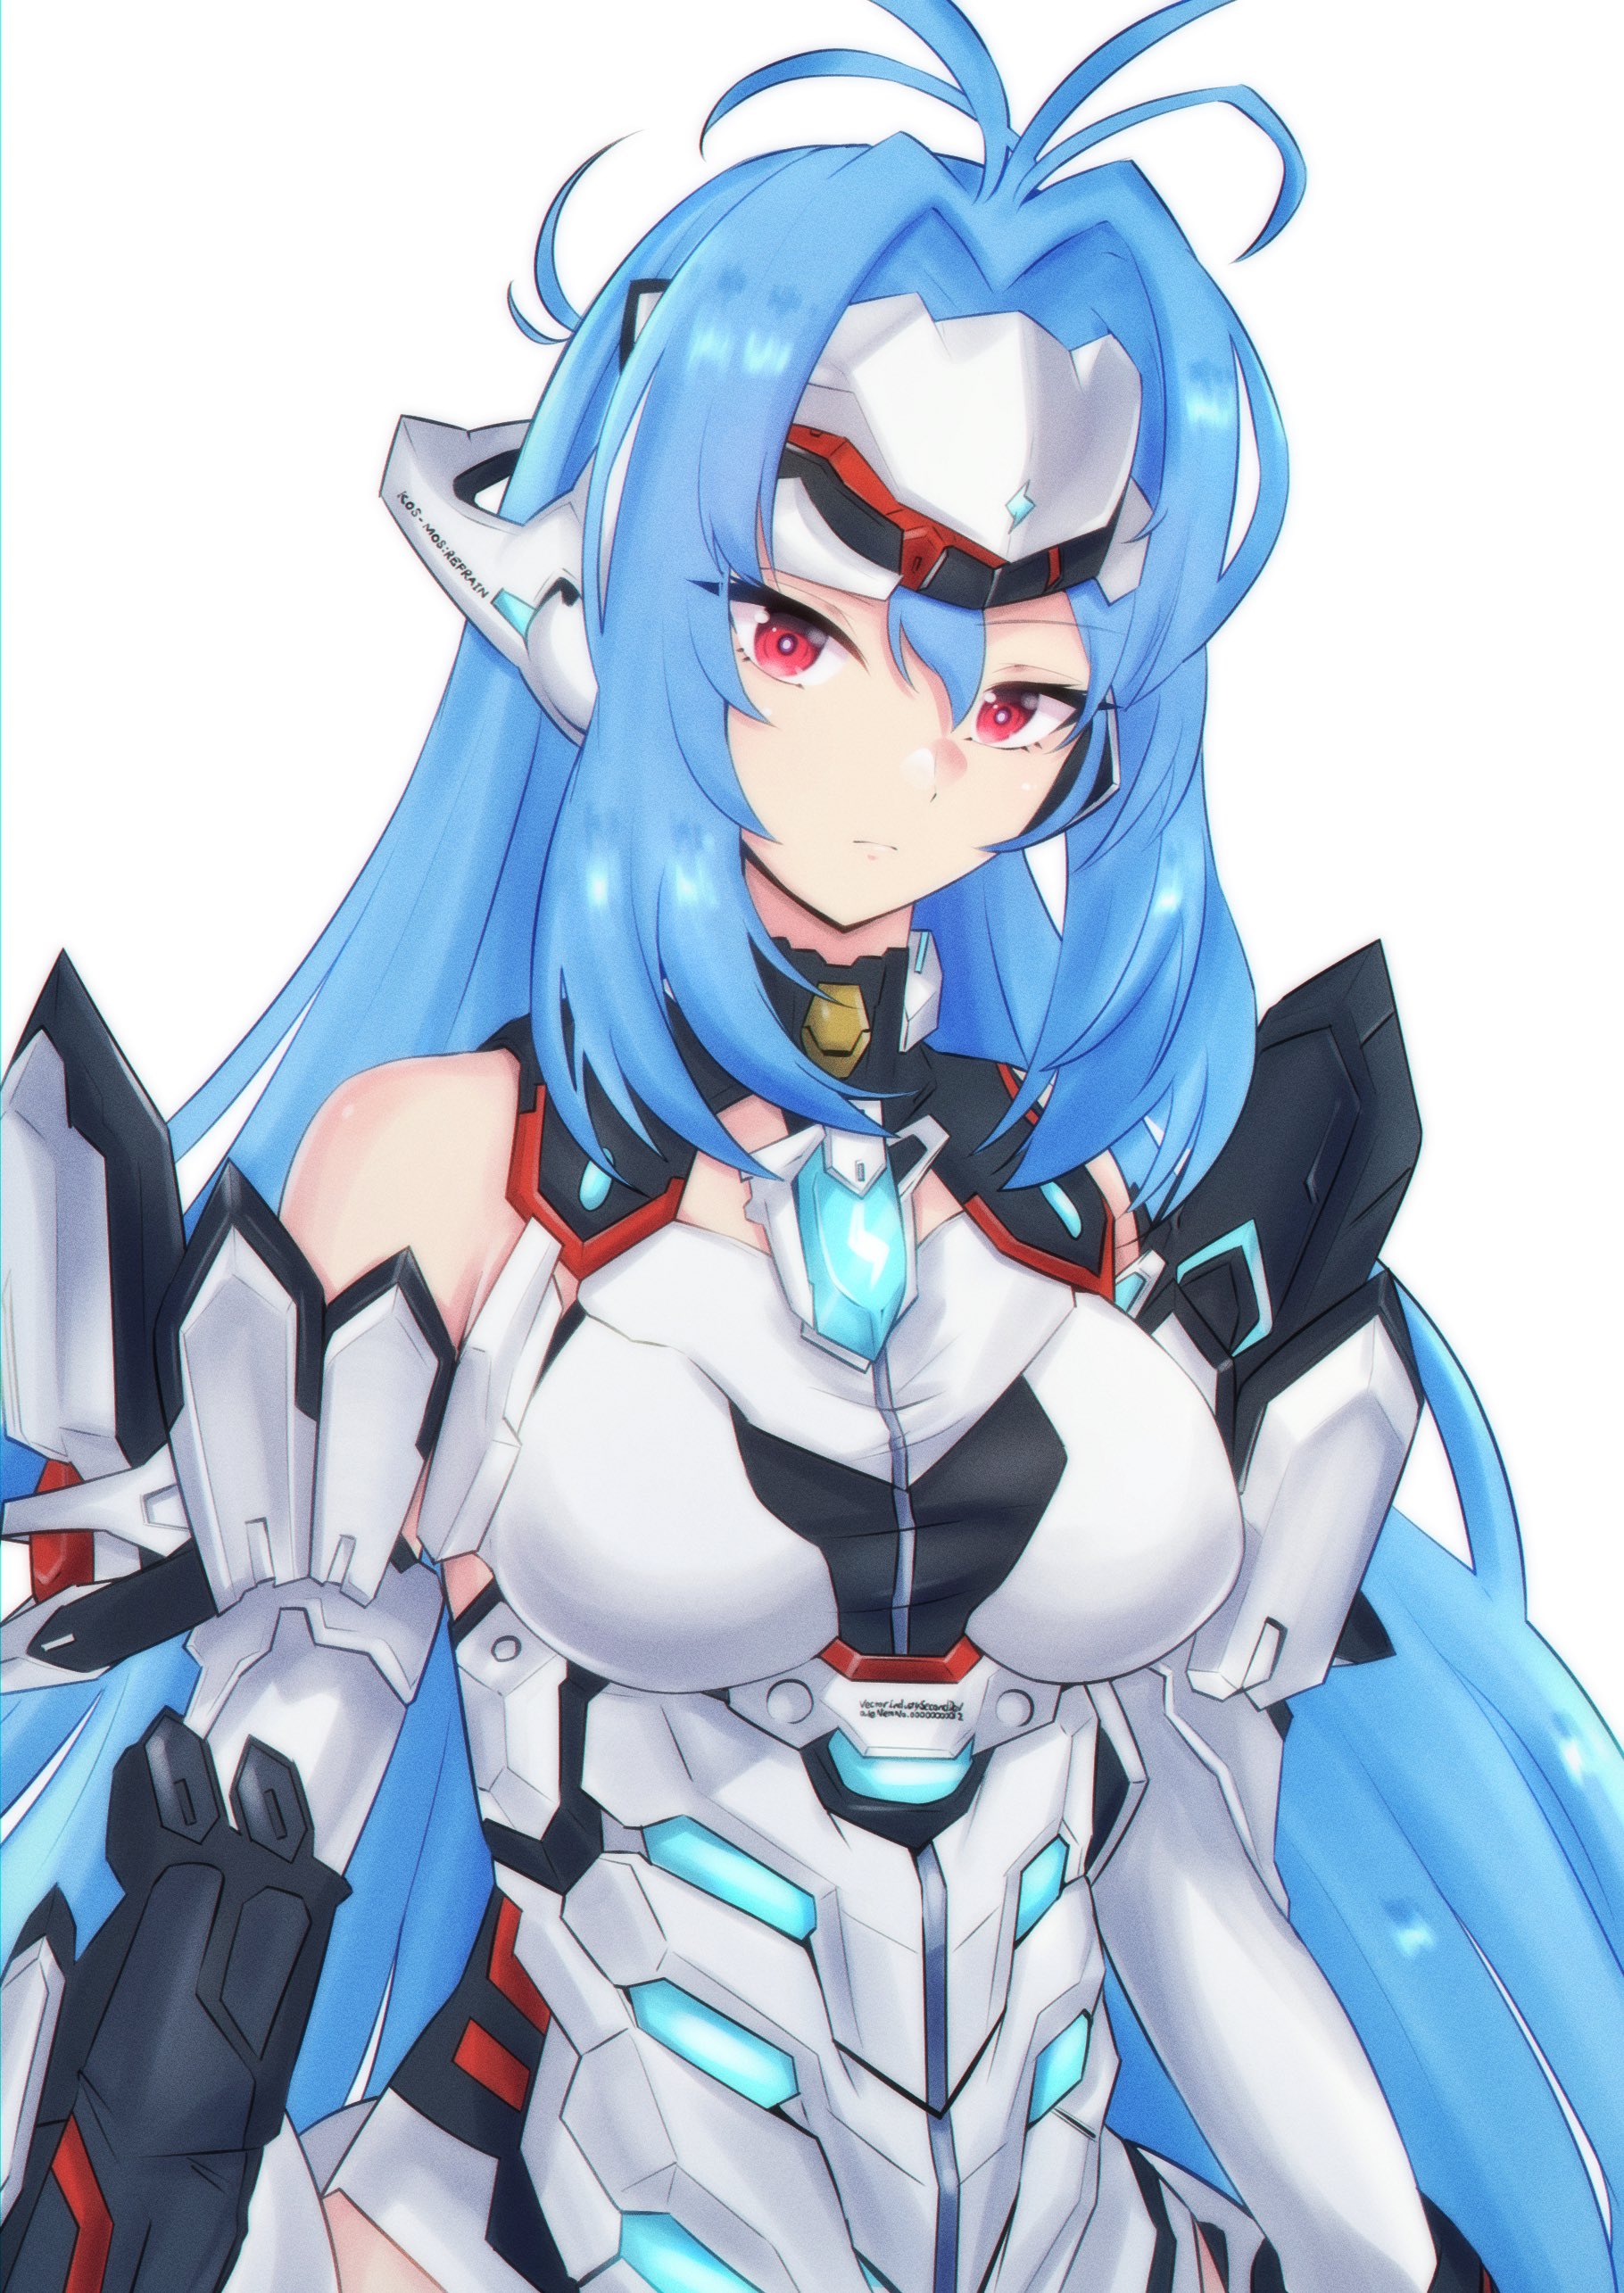 kos-mos and kos-mos re: (xenoblade chronicles and 2 more) drawn by latte